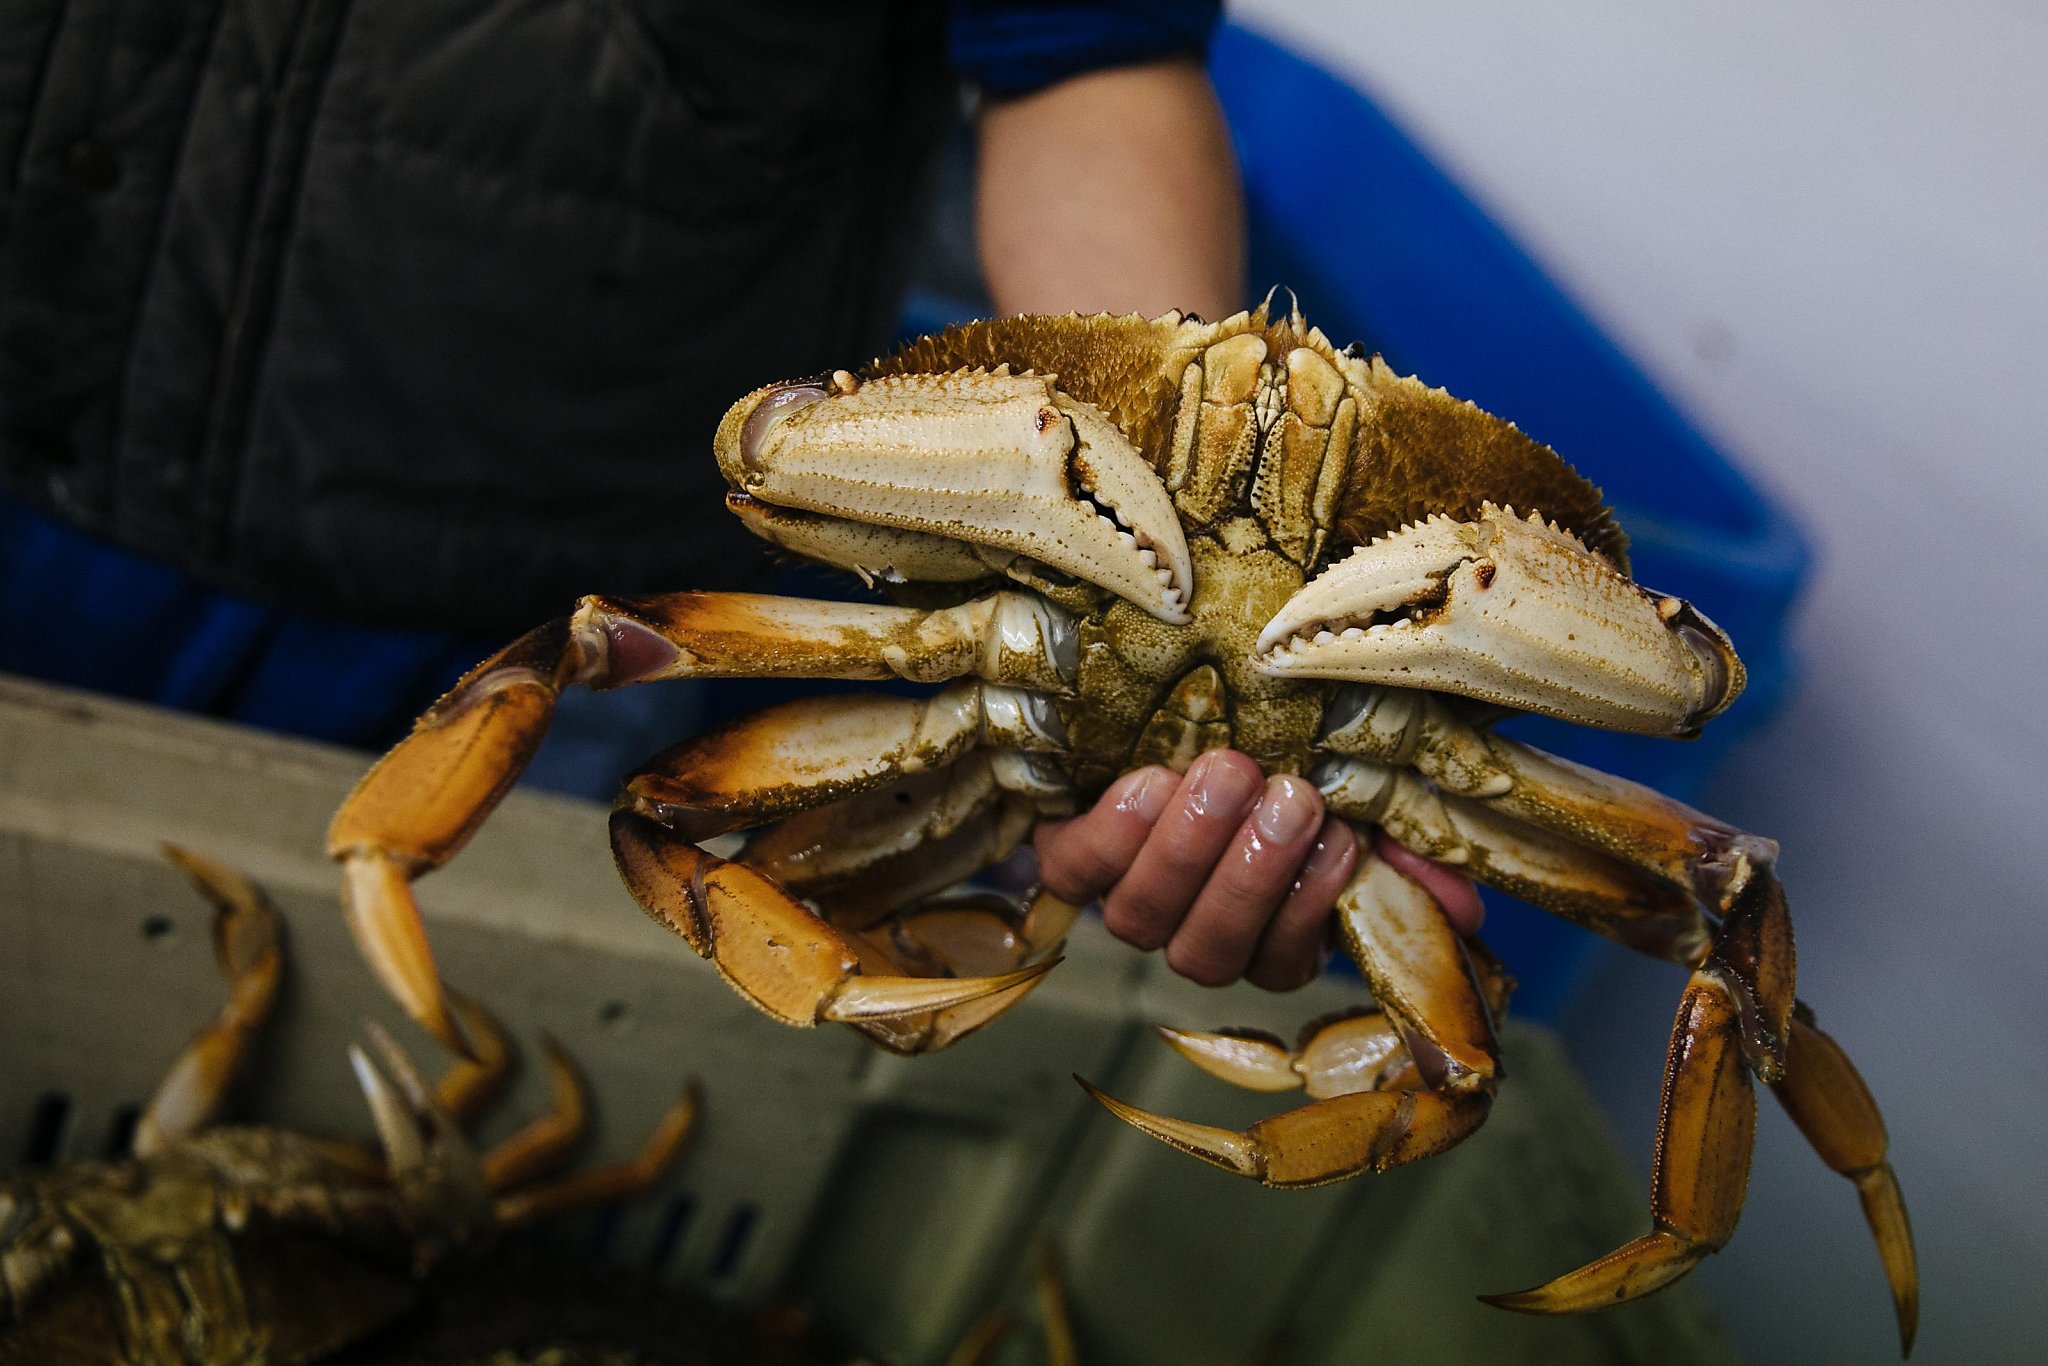 Dungeness crab season opens Saturday in the Bay Area